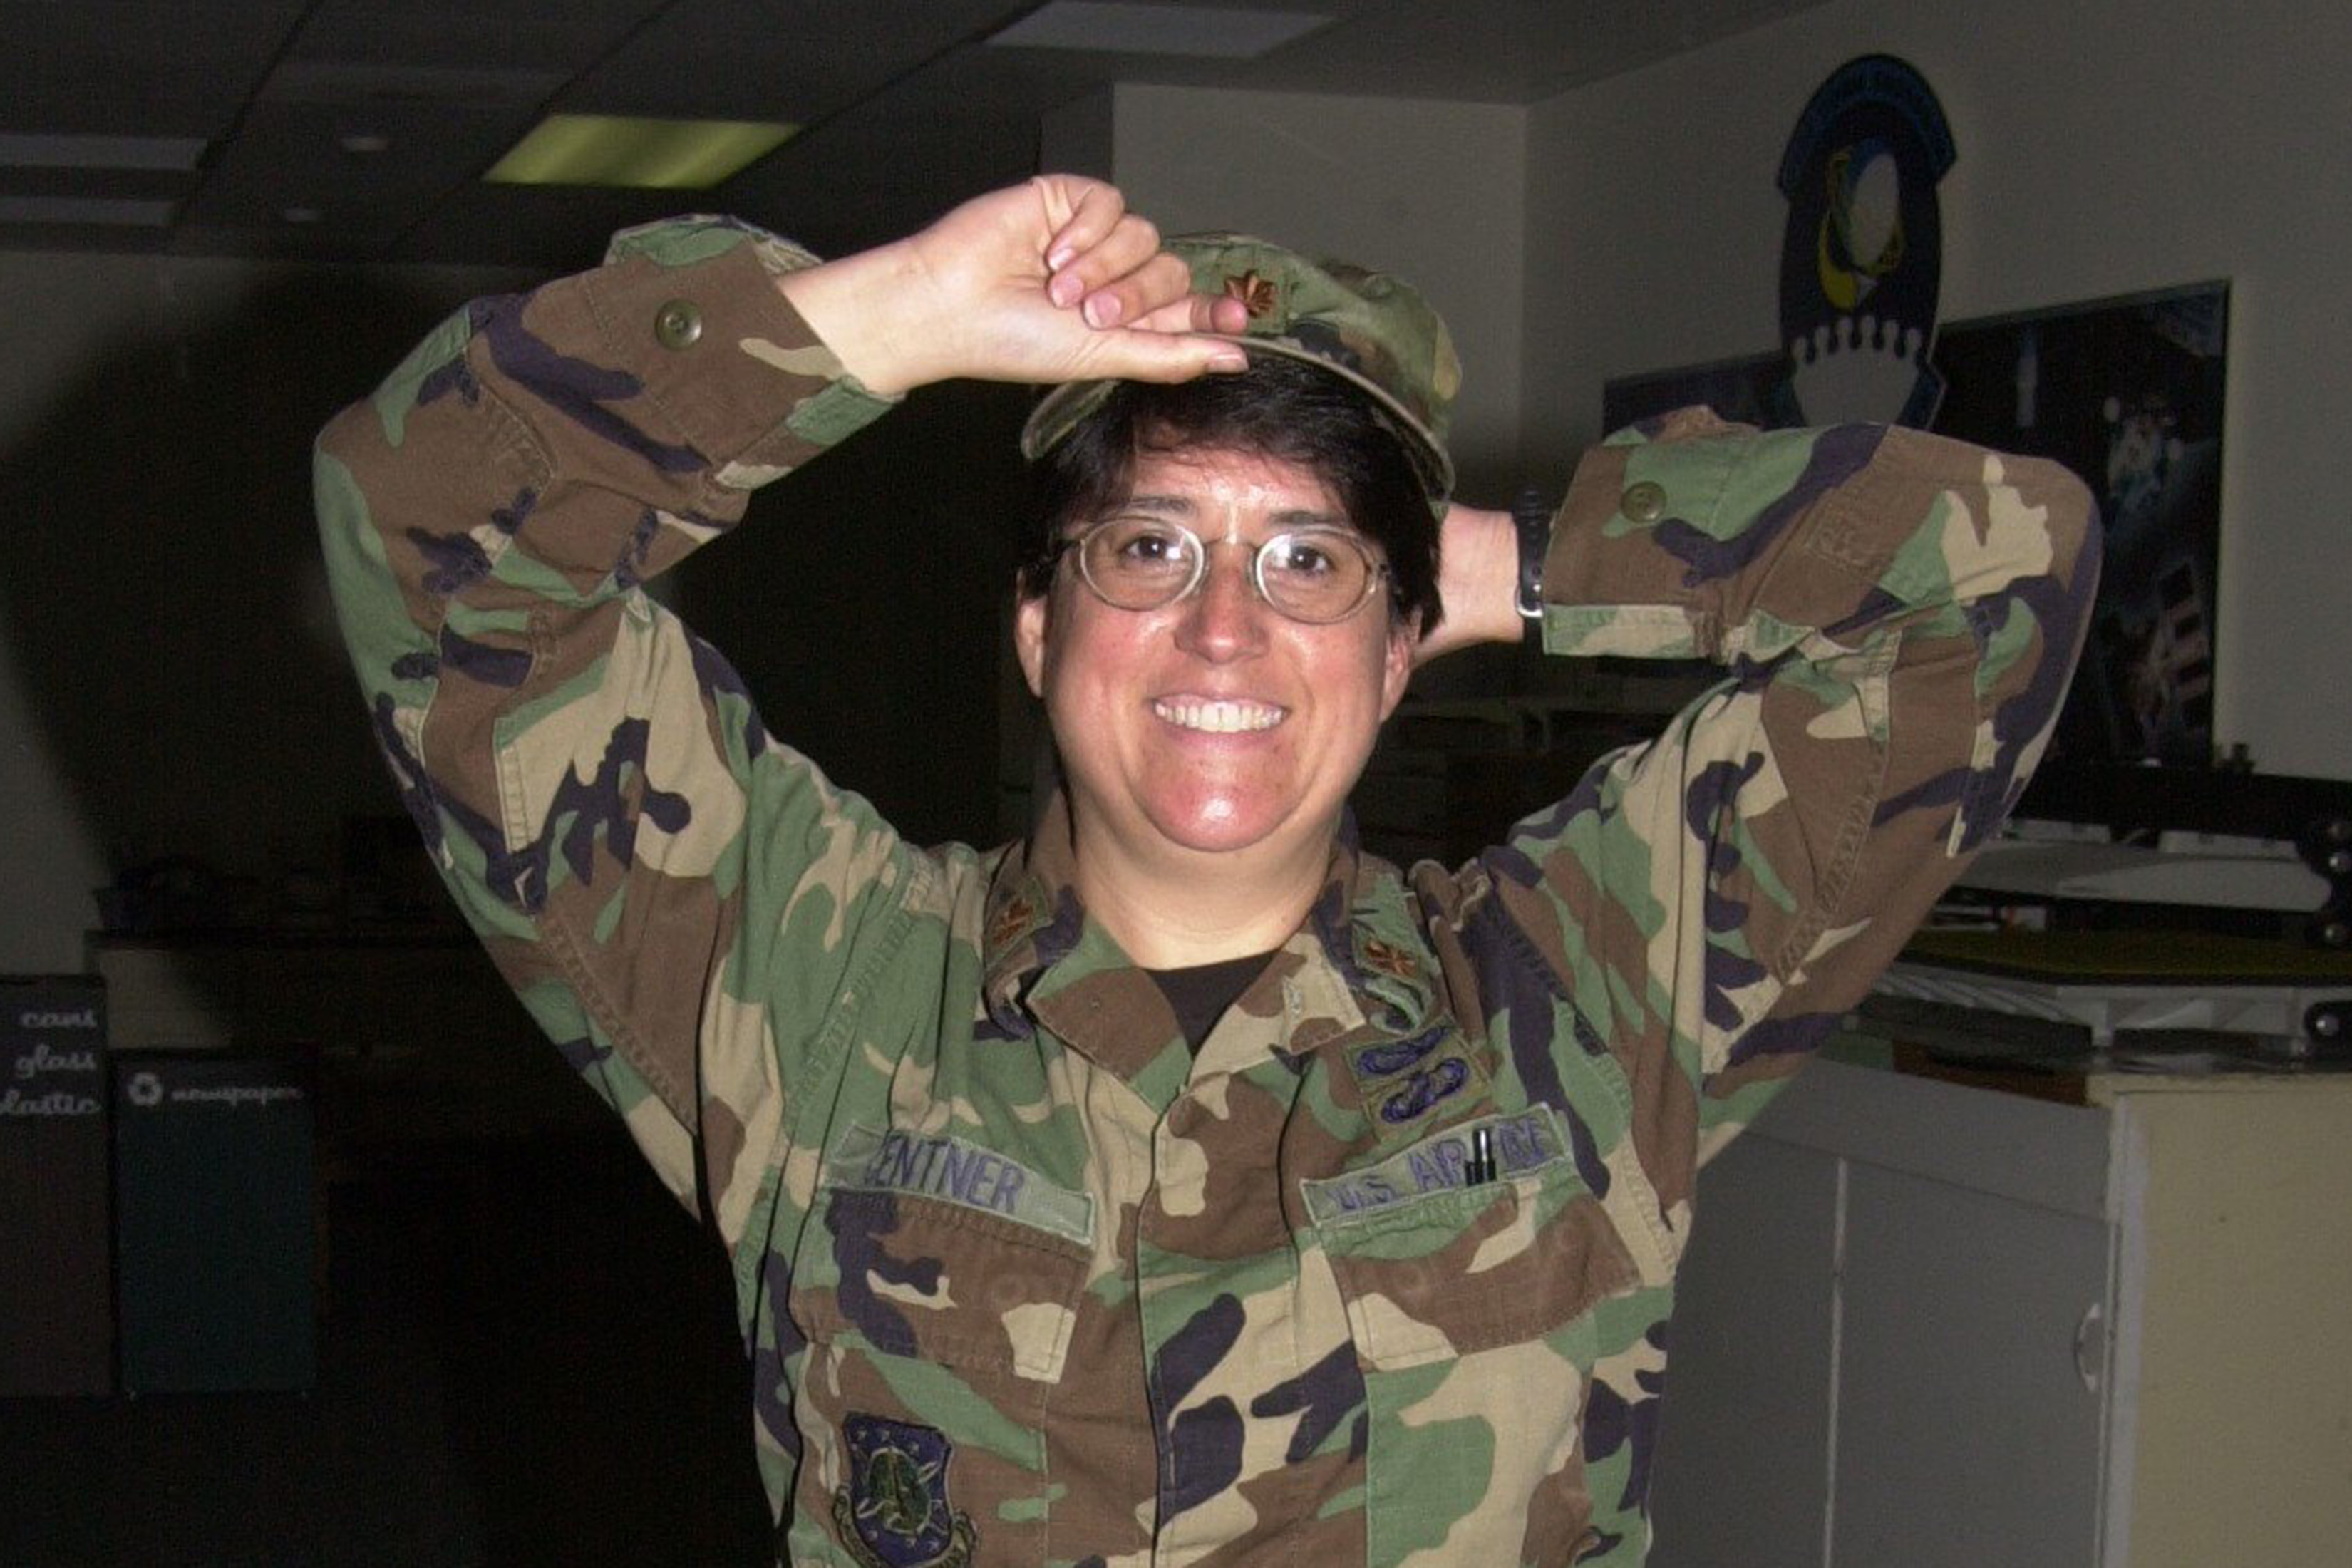 Teri Centner is show from the waist up wearing military fatigues and adjusting her hat with both hands. She is smiling broadly.